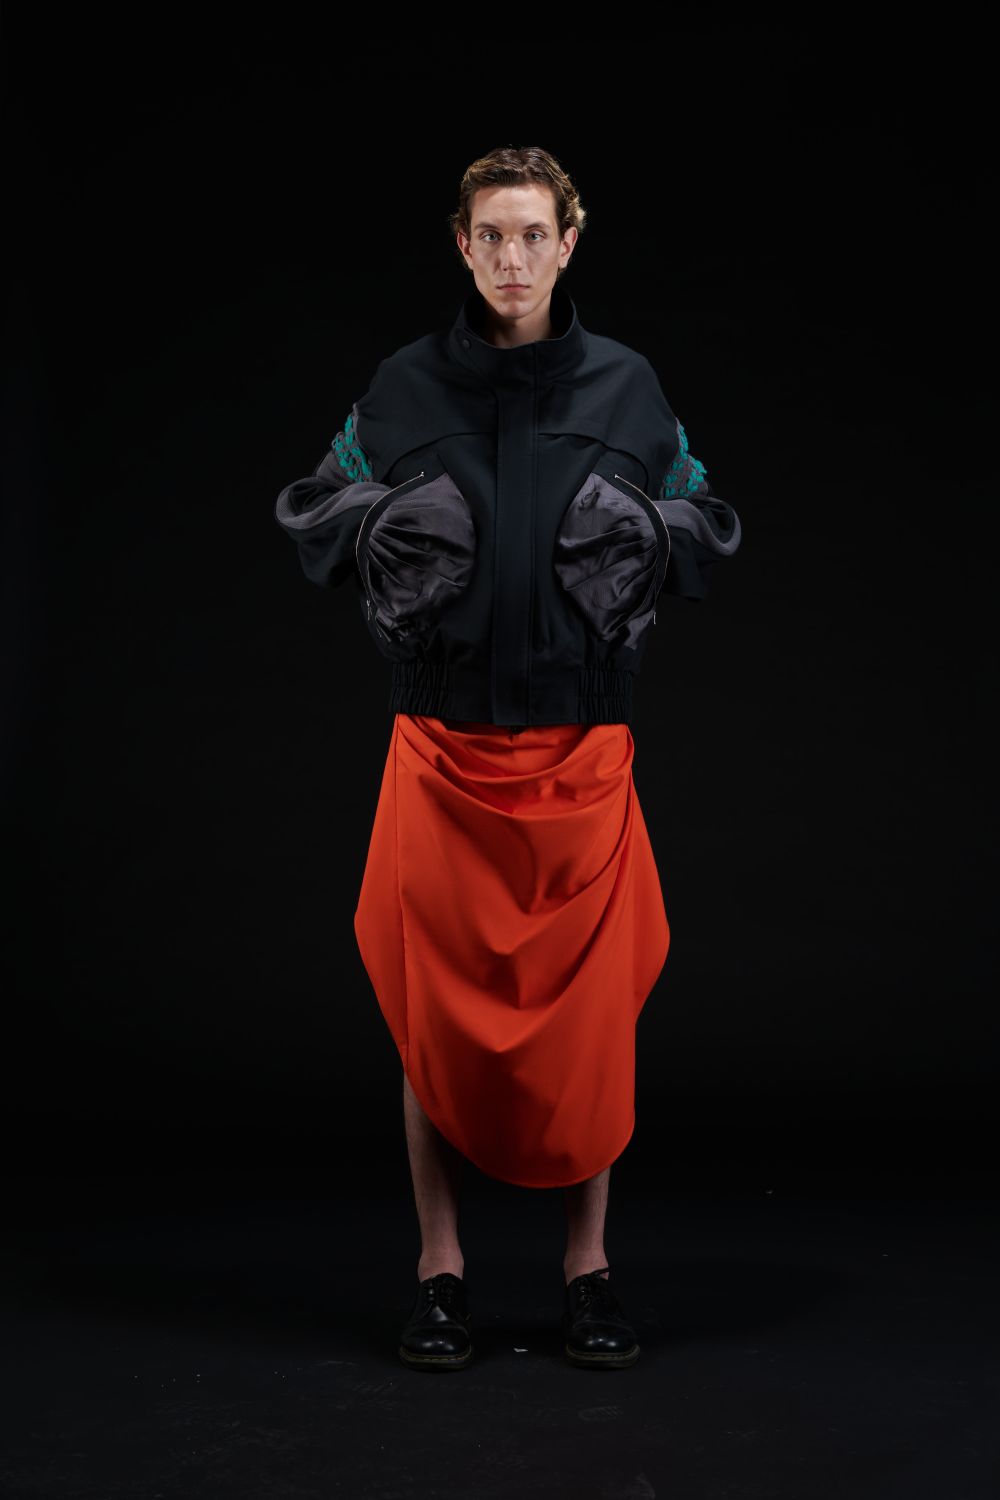 Male model in black top with covered hands and red skirt.